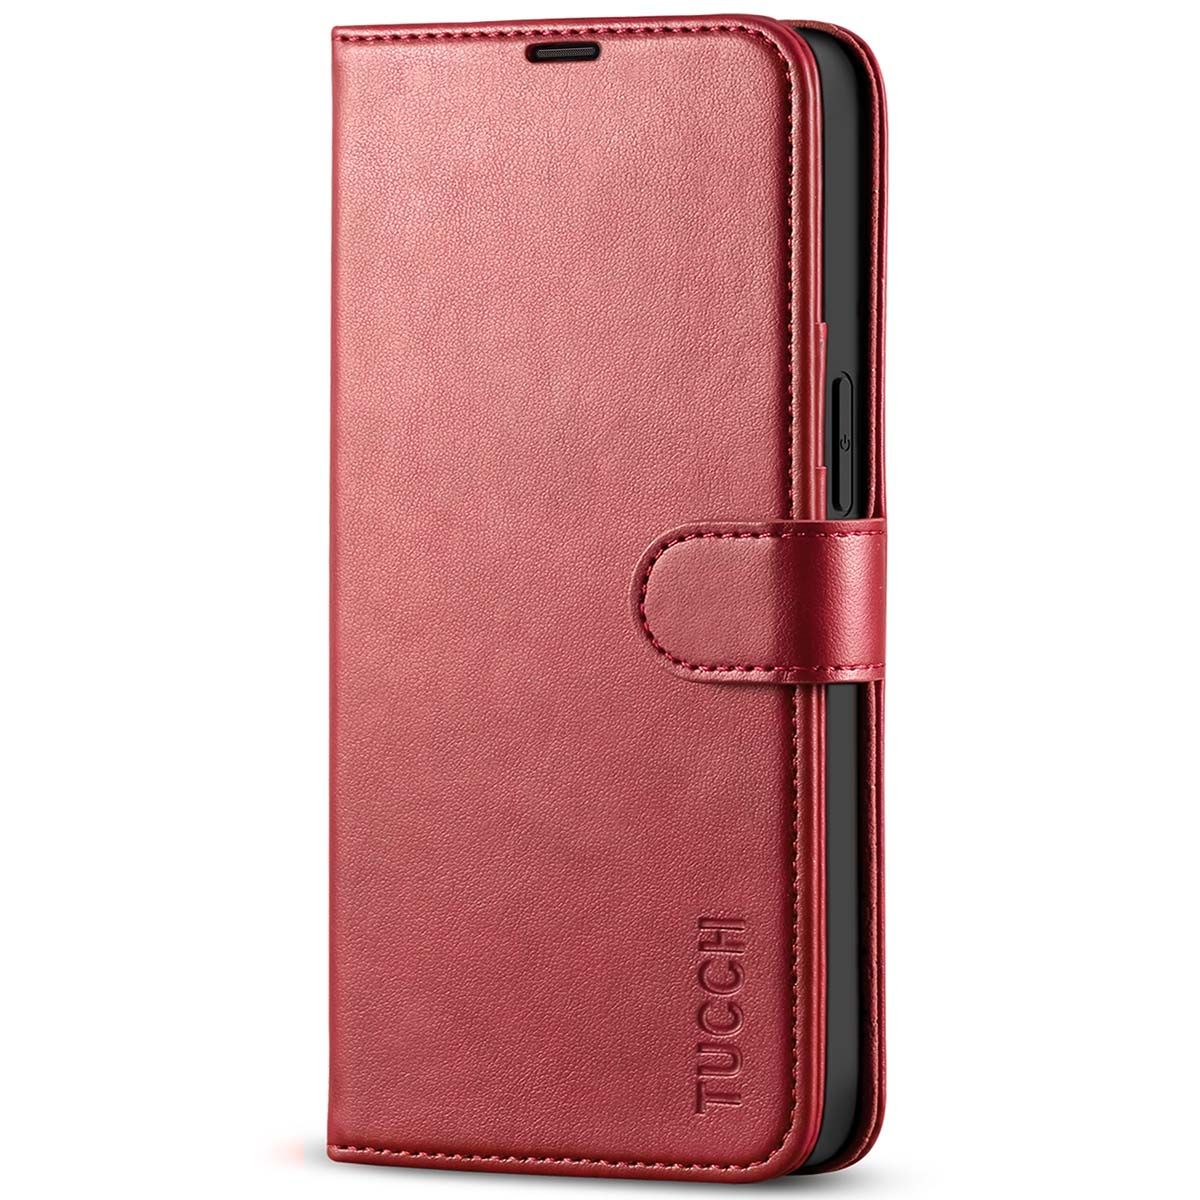 TUCCH IPhone 11 Pro Max Leather Wallet Case Folio Flip